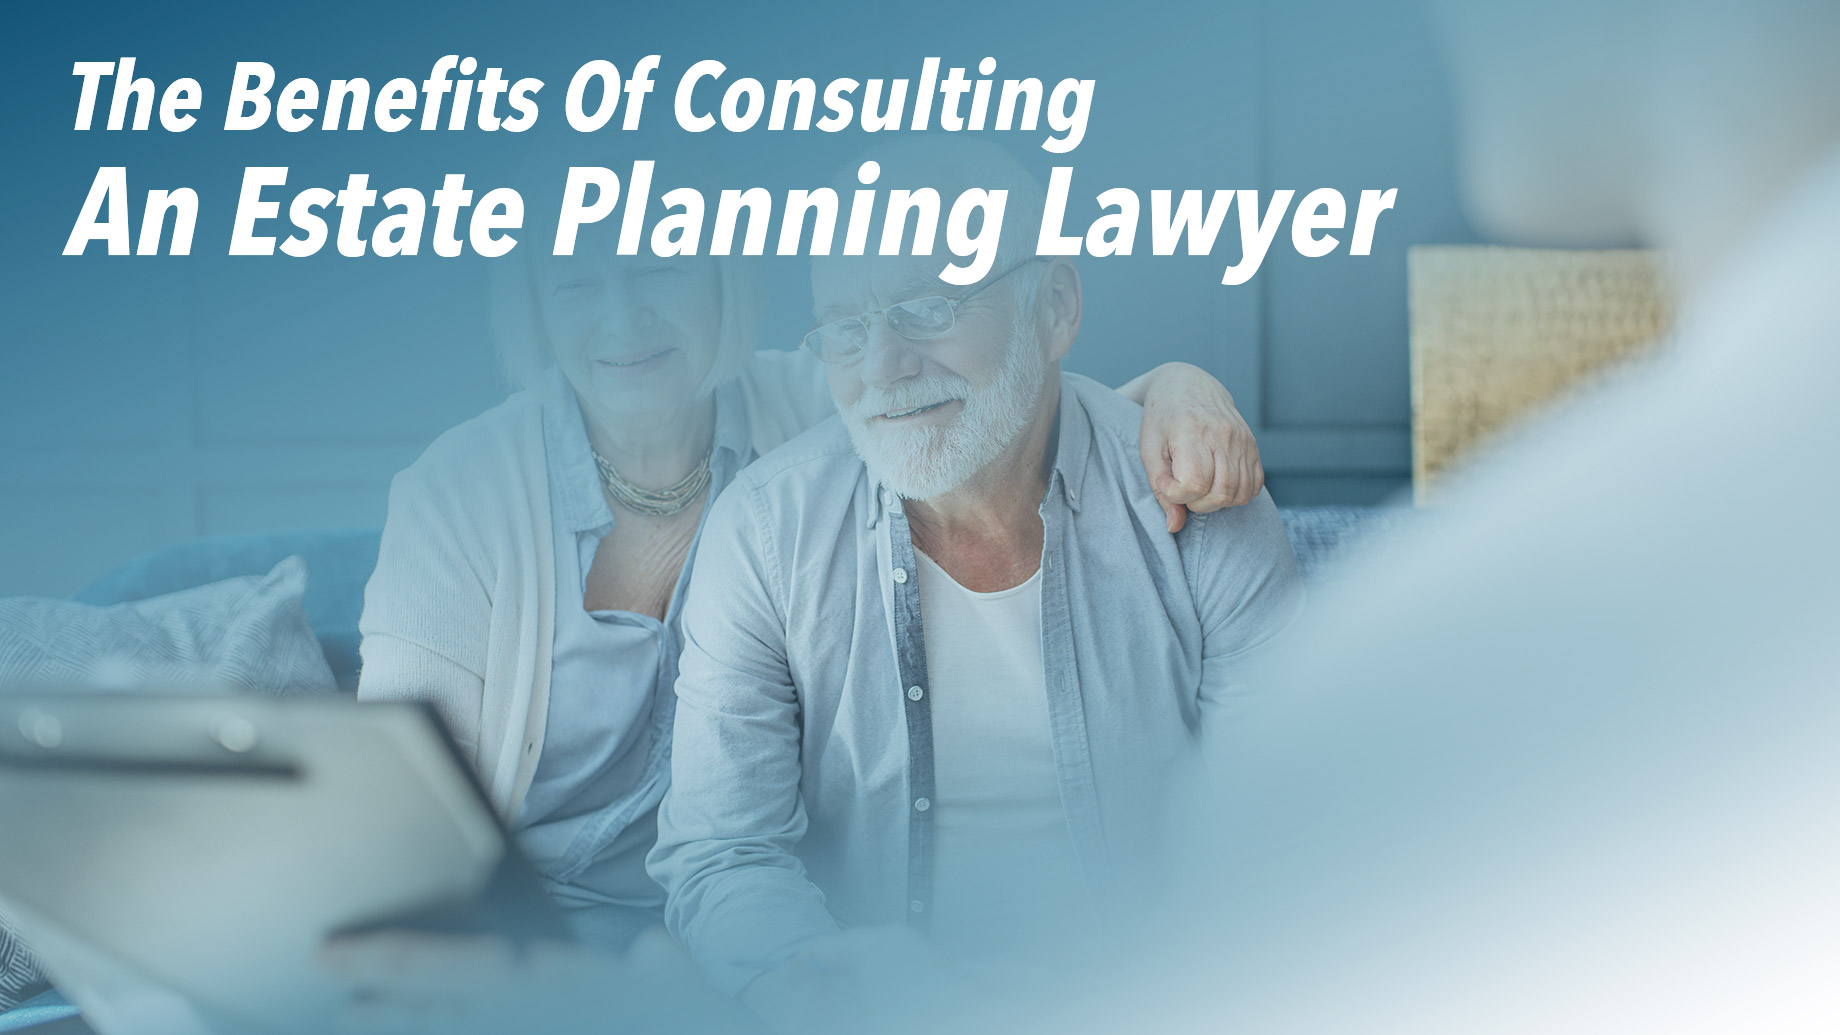 The Benefits Of Consulting An Estate Planning Lawyer